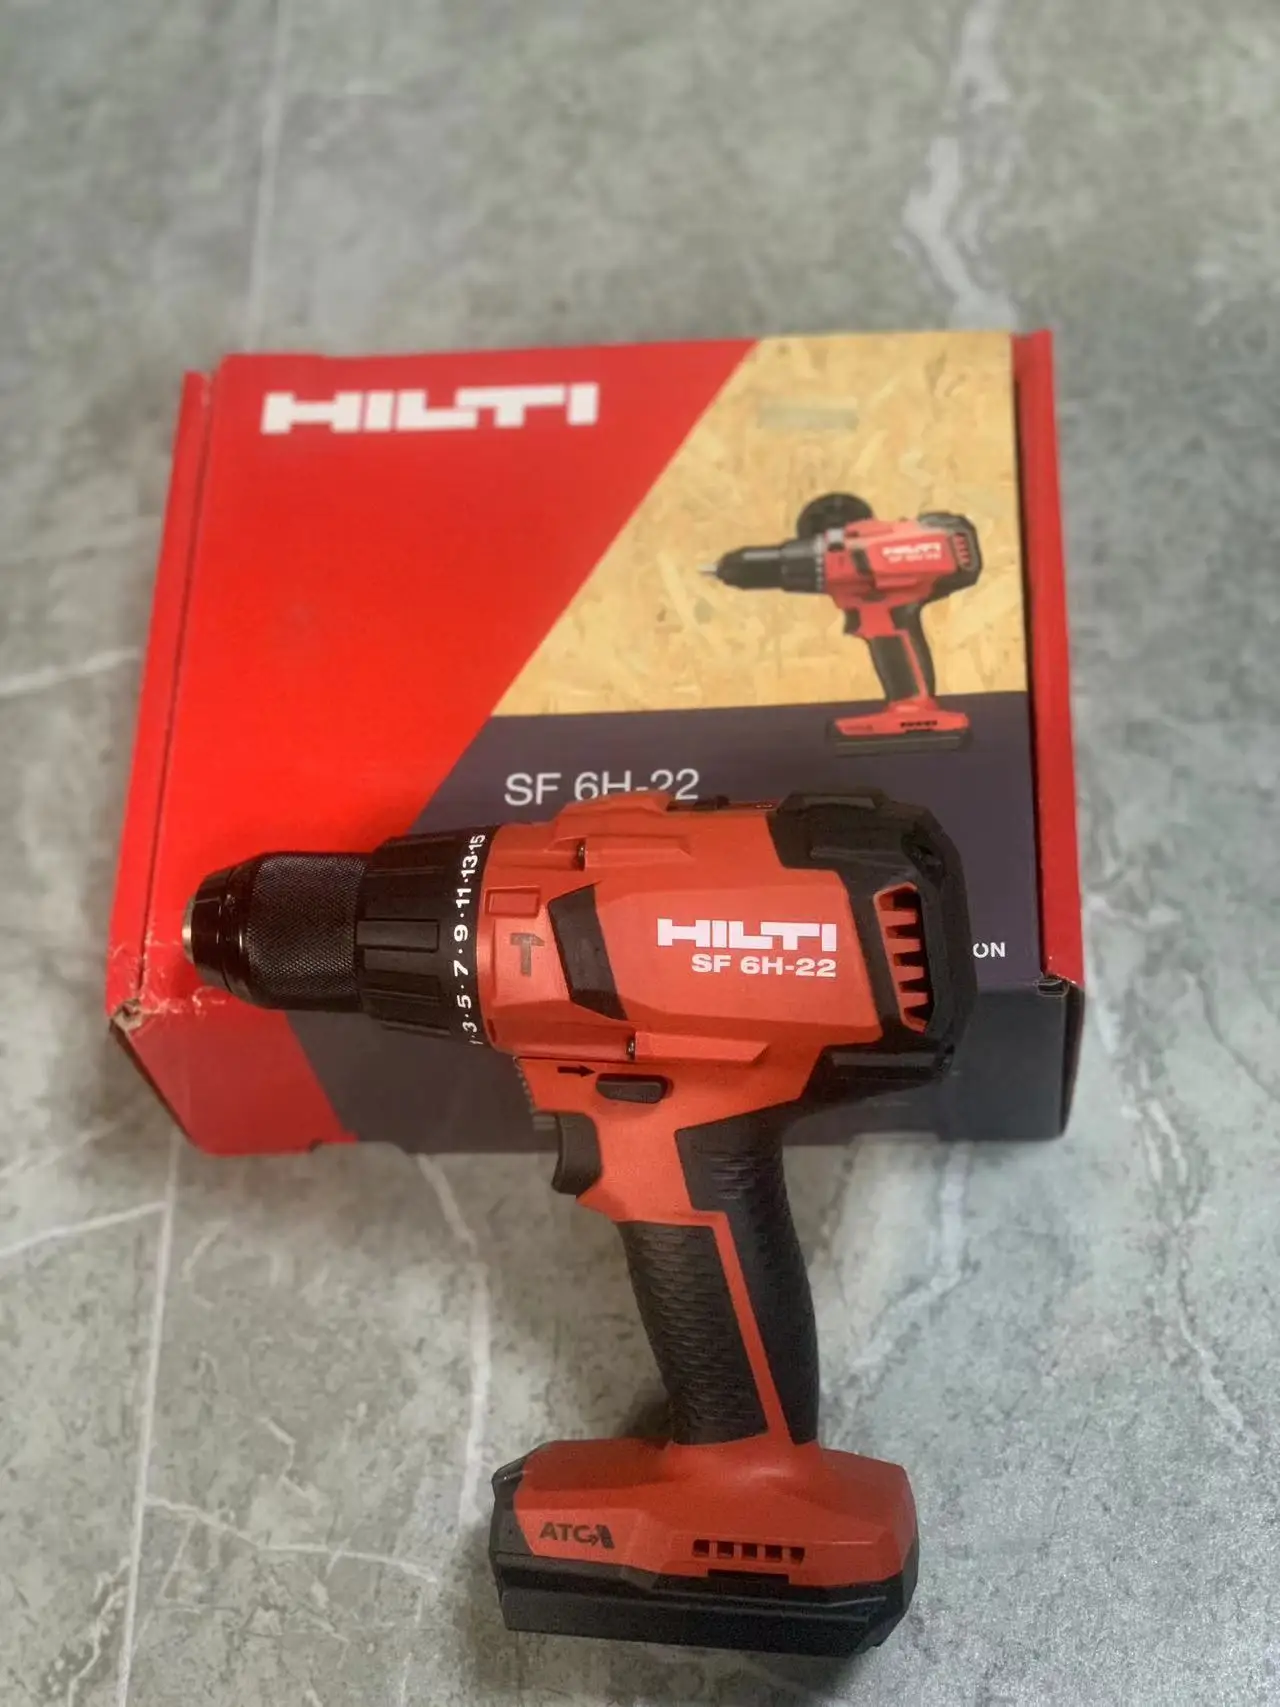 

New Hilti Nuron SF 6H-22 Cordless Hammer Drill Driver in Case tool only